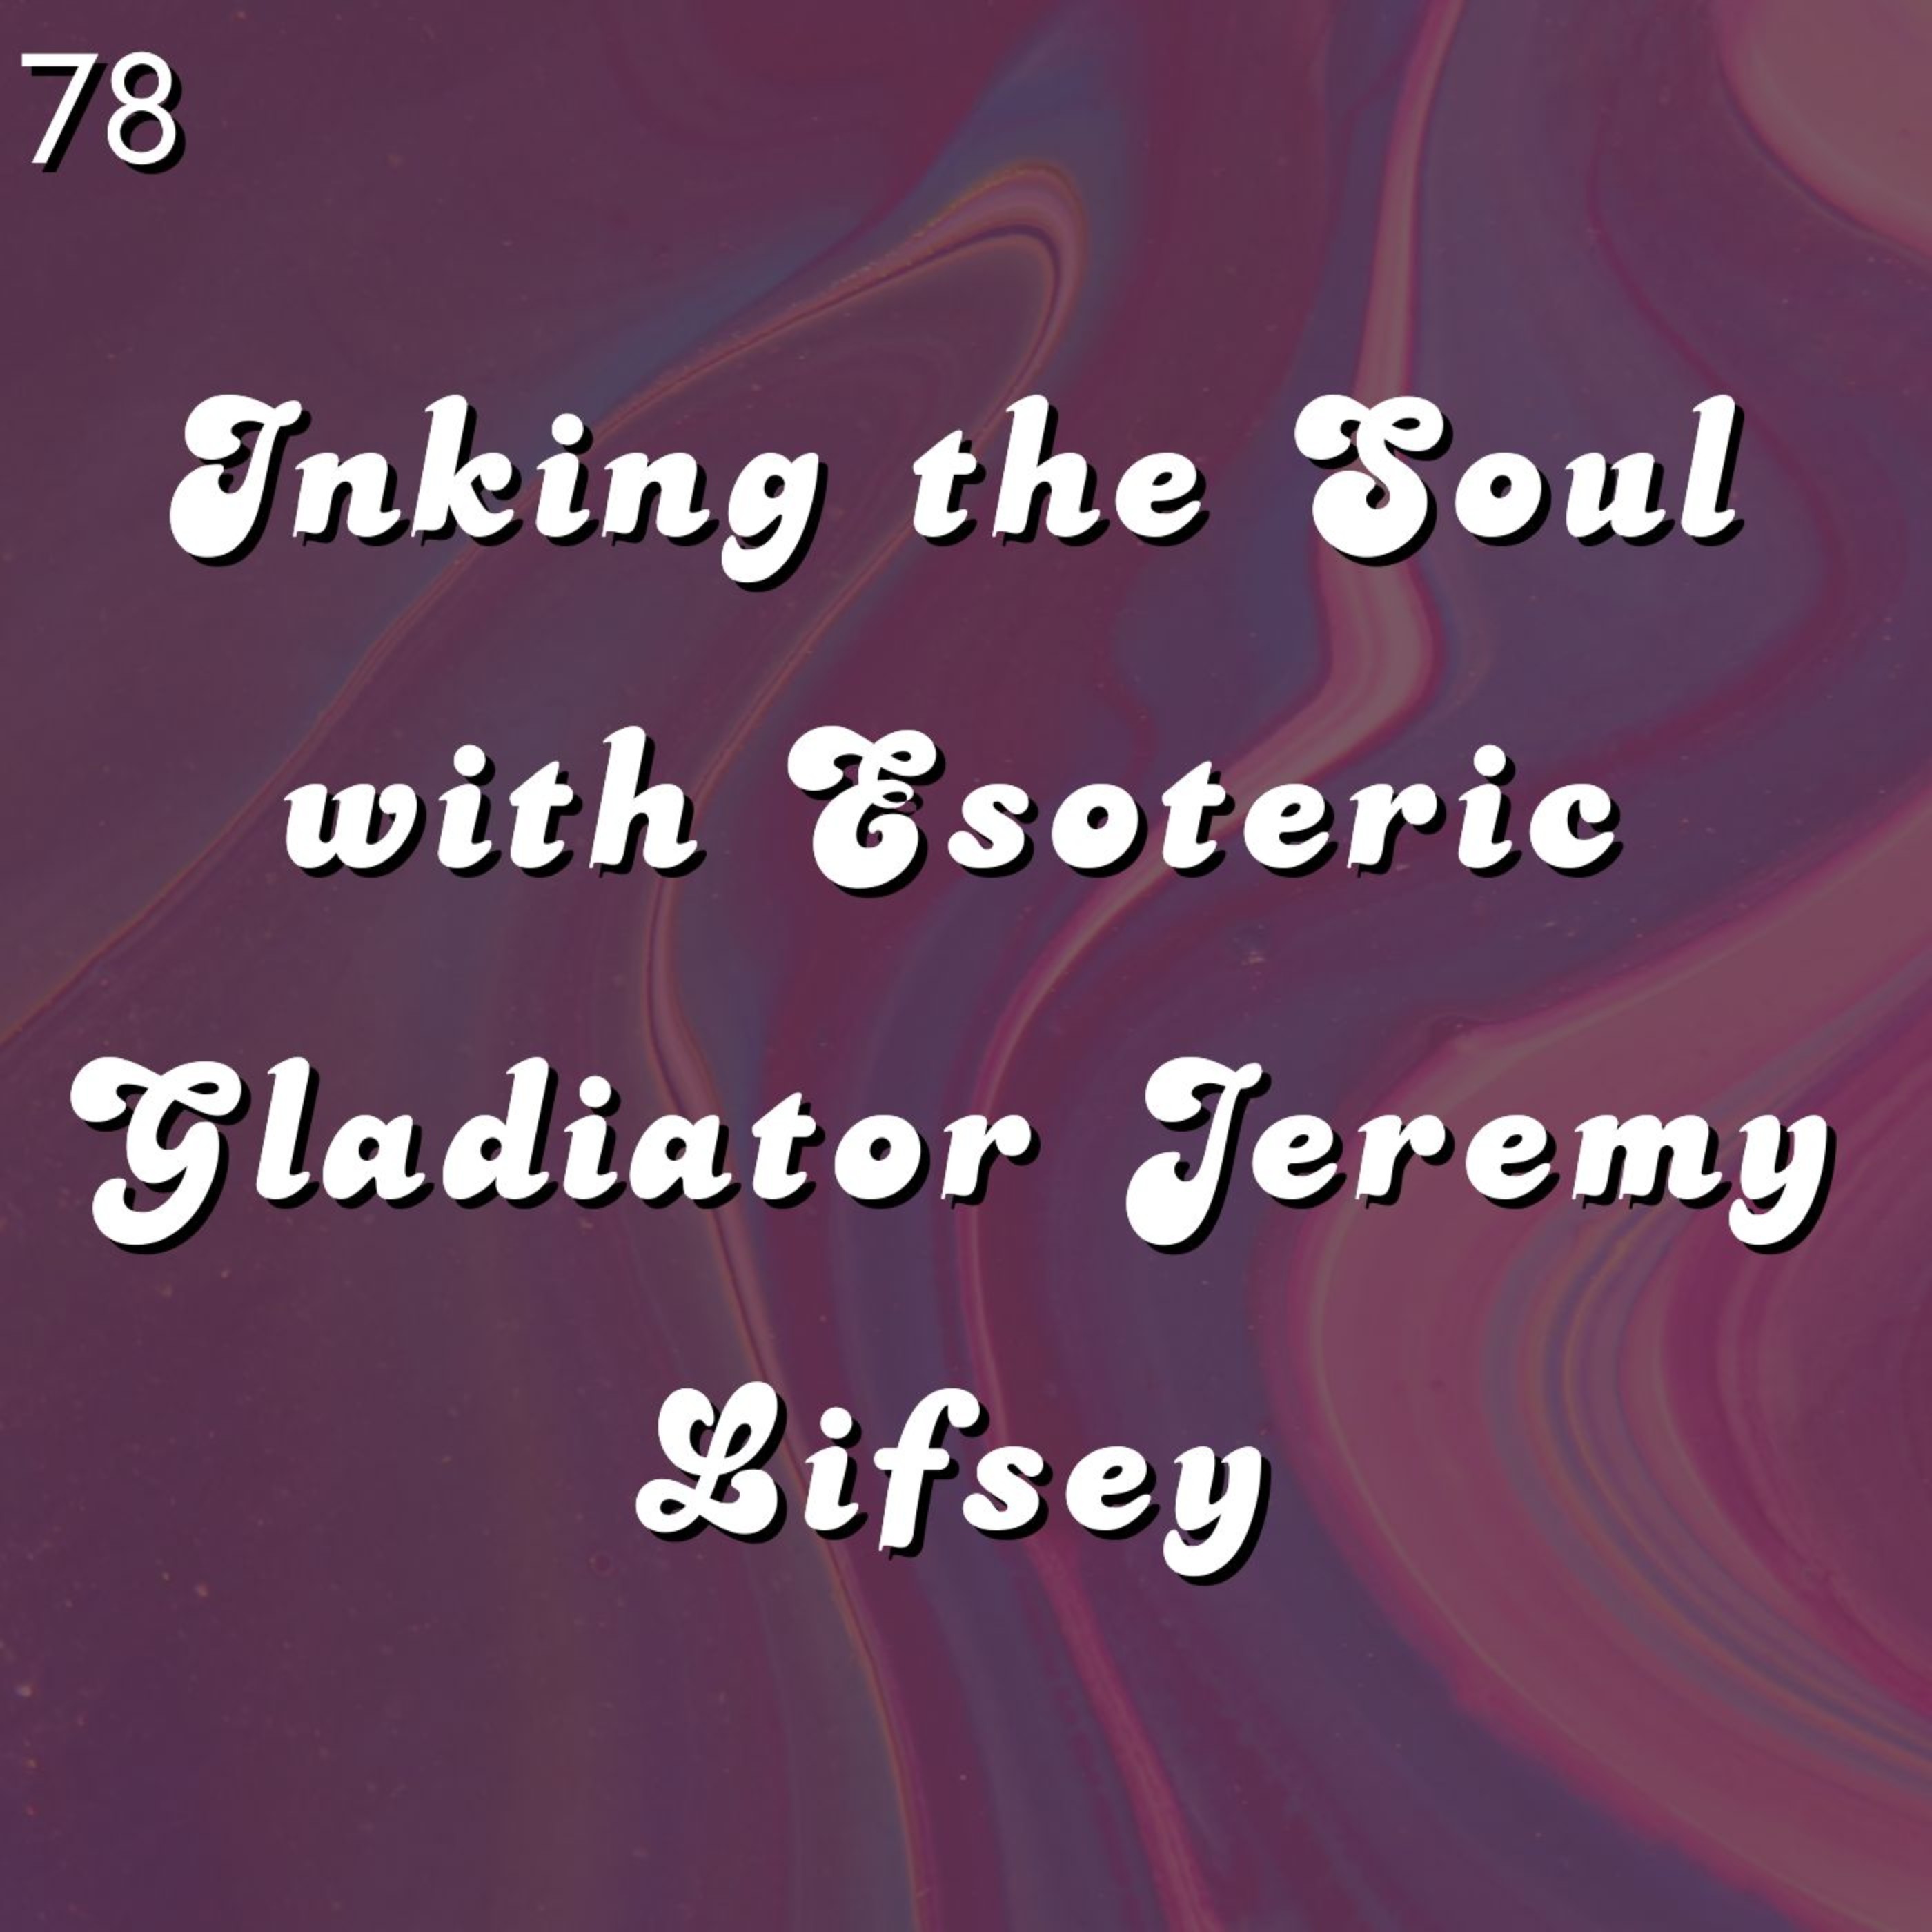 #78 - Inking the Soul with Esoteric Gladiator Jeremy Lifsey